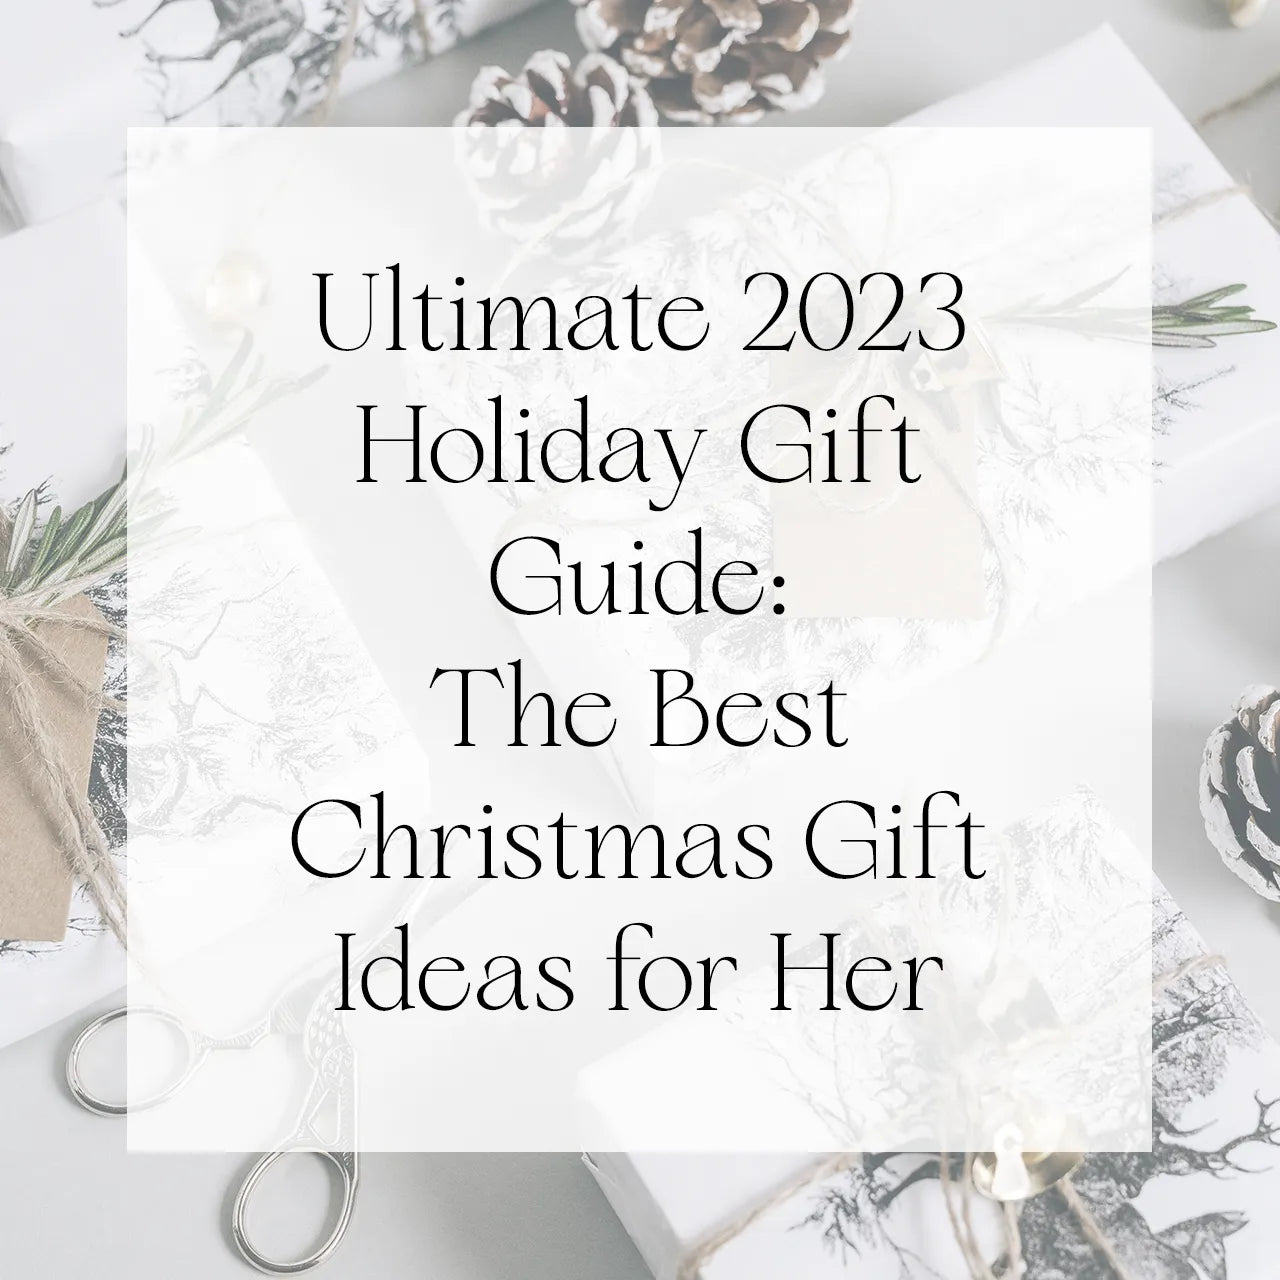 Ultimate 2023 Holiday Gift Guide: The Best Christmas Gift Ideas for Her